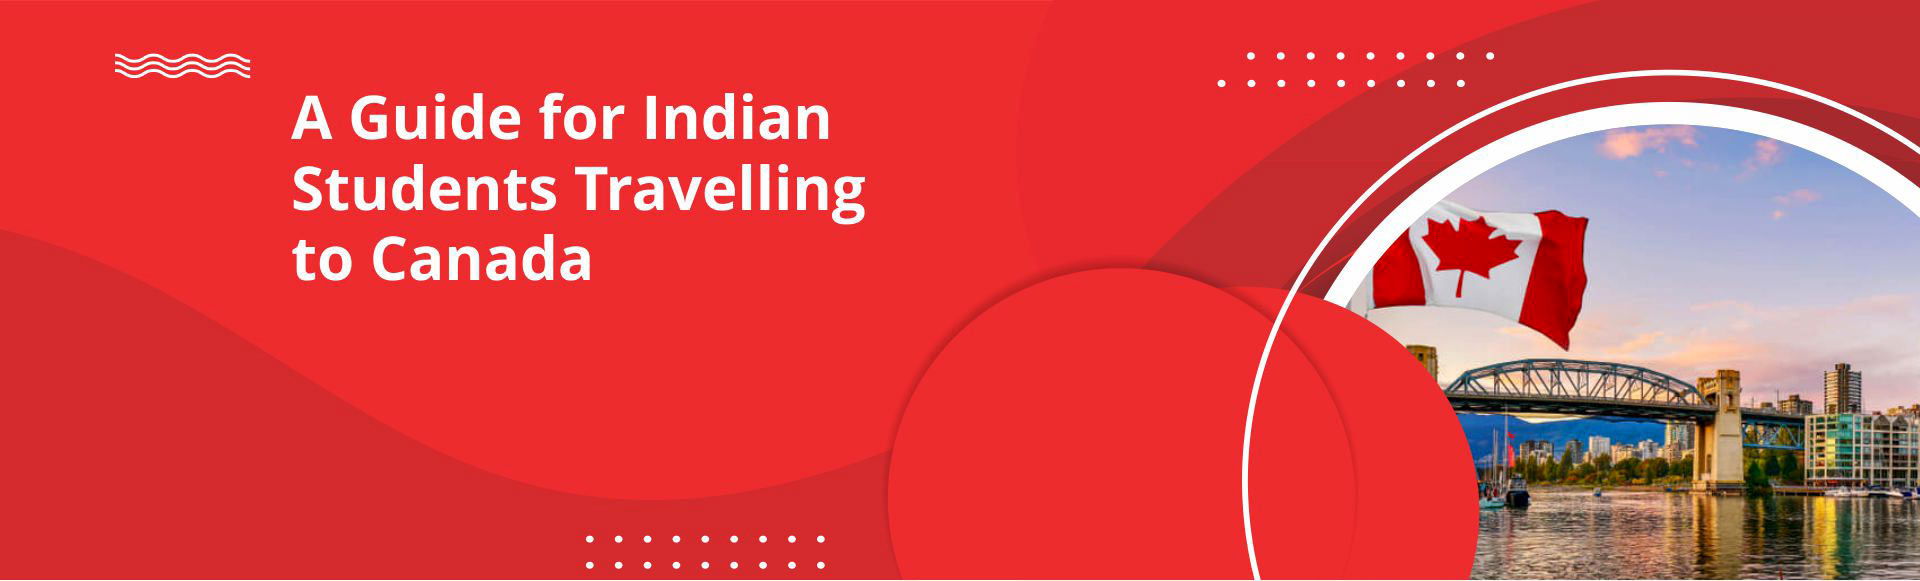 A Guide for Indian Students travelling to Canada